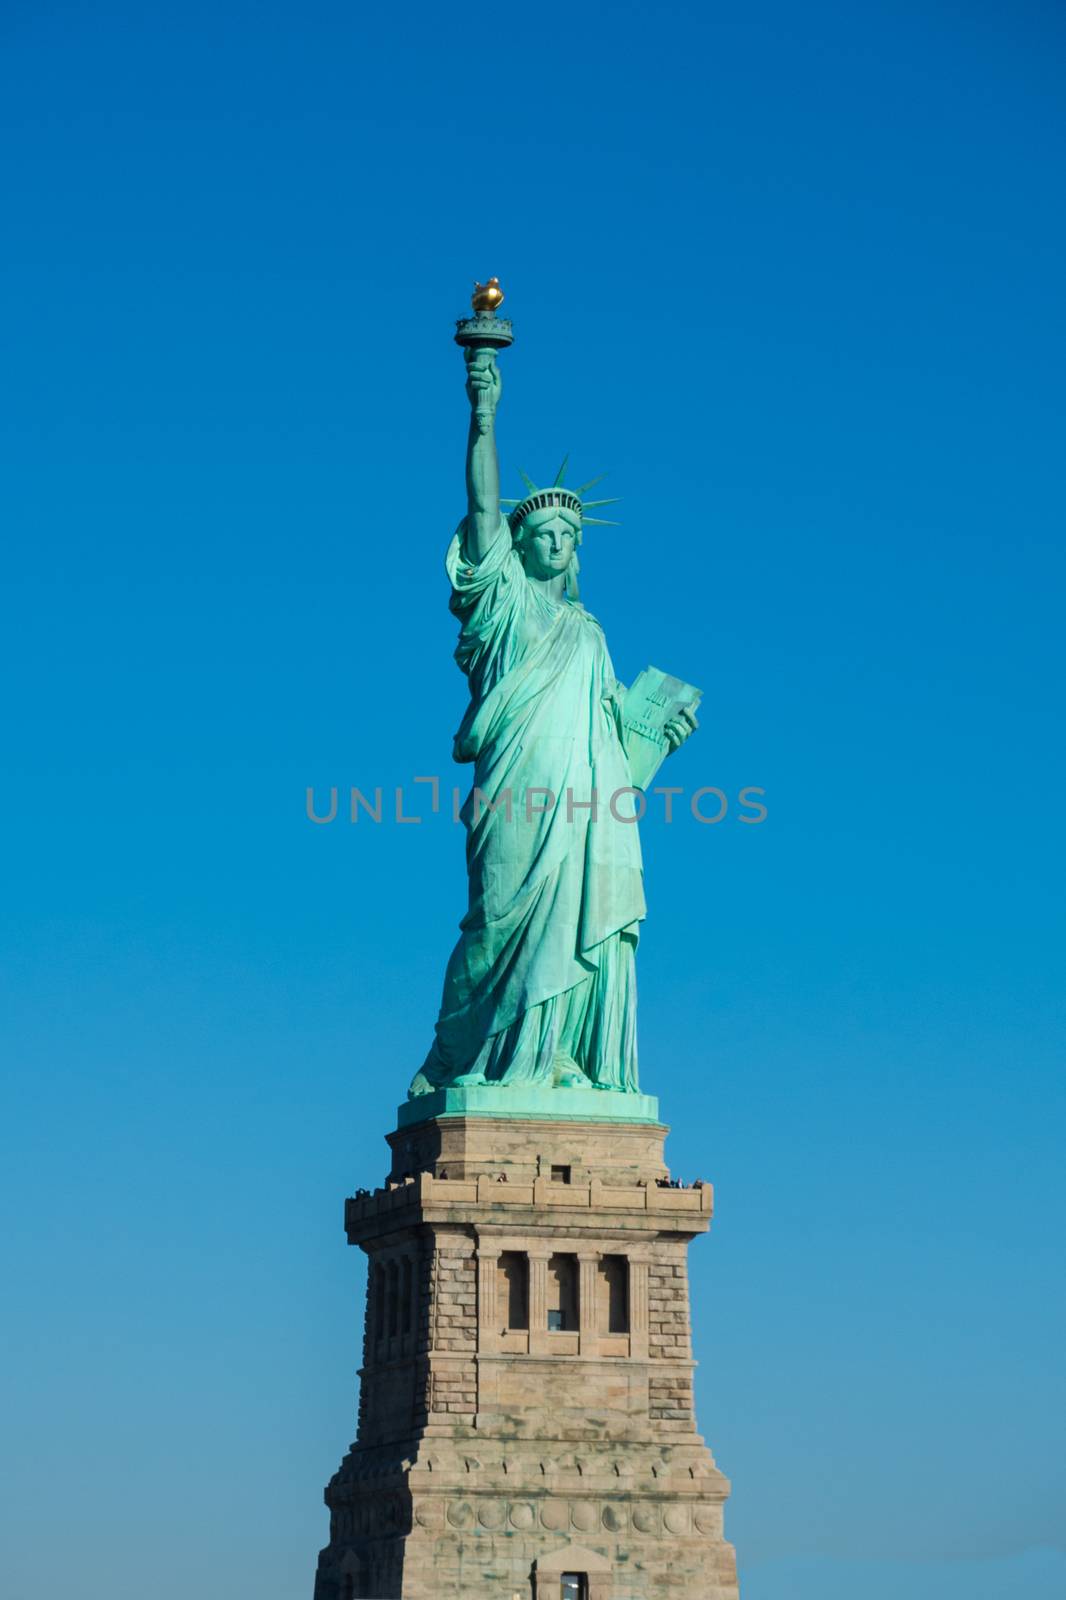 Statue of Liberty at perfect weather conditions blue sky copper